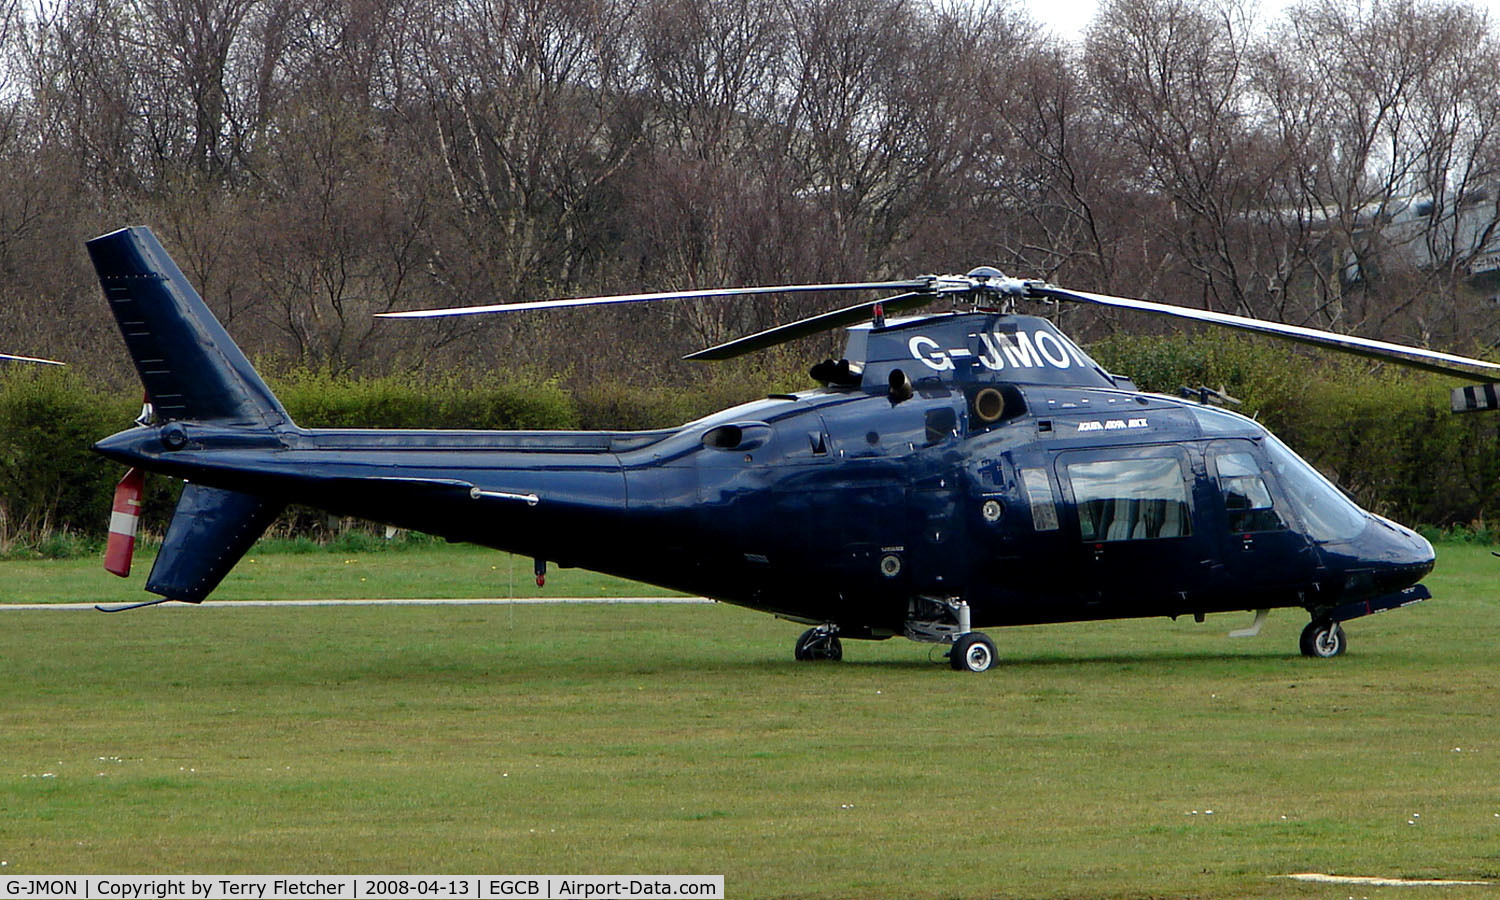 G-JMON, 1988 Agusta A-109A-II C/N 7411, One of 8 Helicopter vistors to Barton Airfield for the Manchester United v Arsenal Soccer match